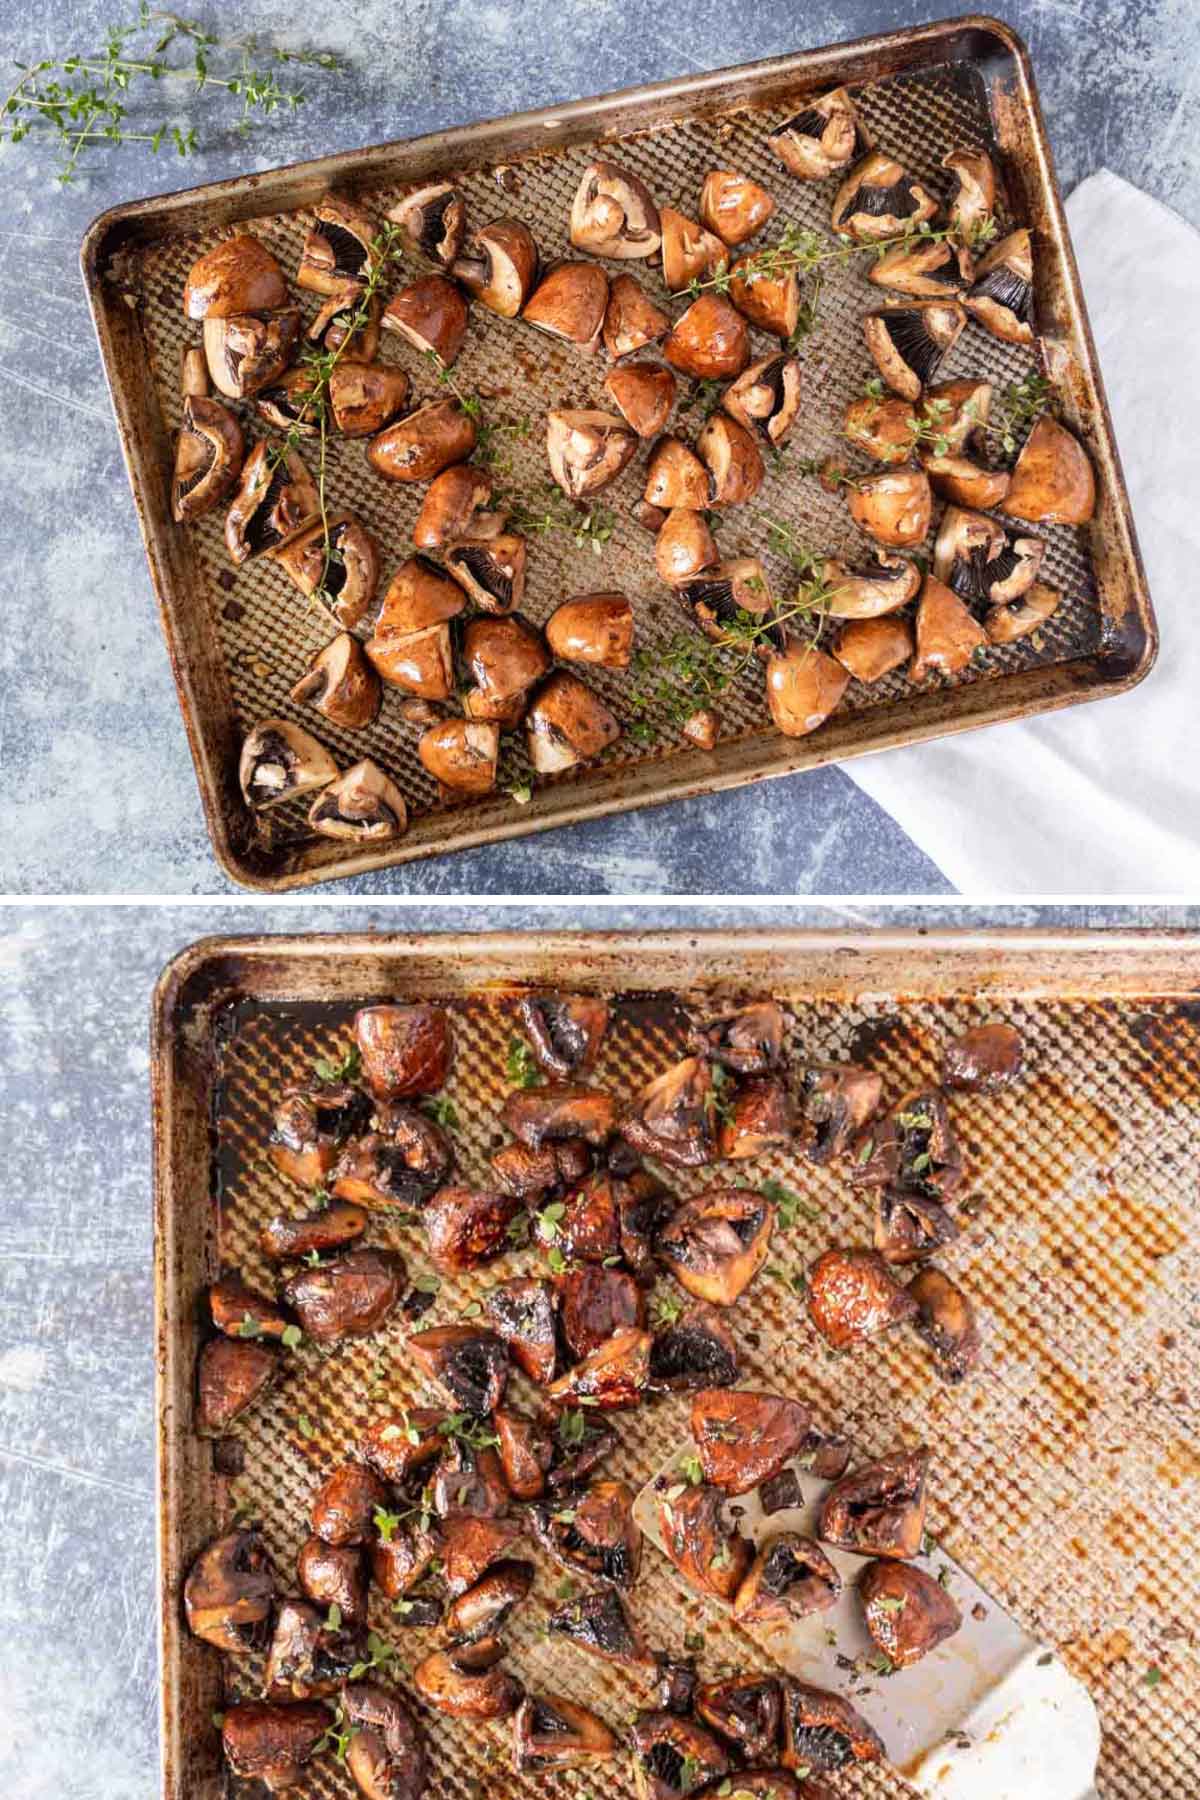 Mushrooms on a baking sheet before and after roasting.